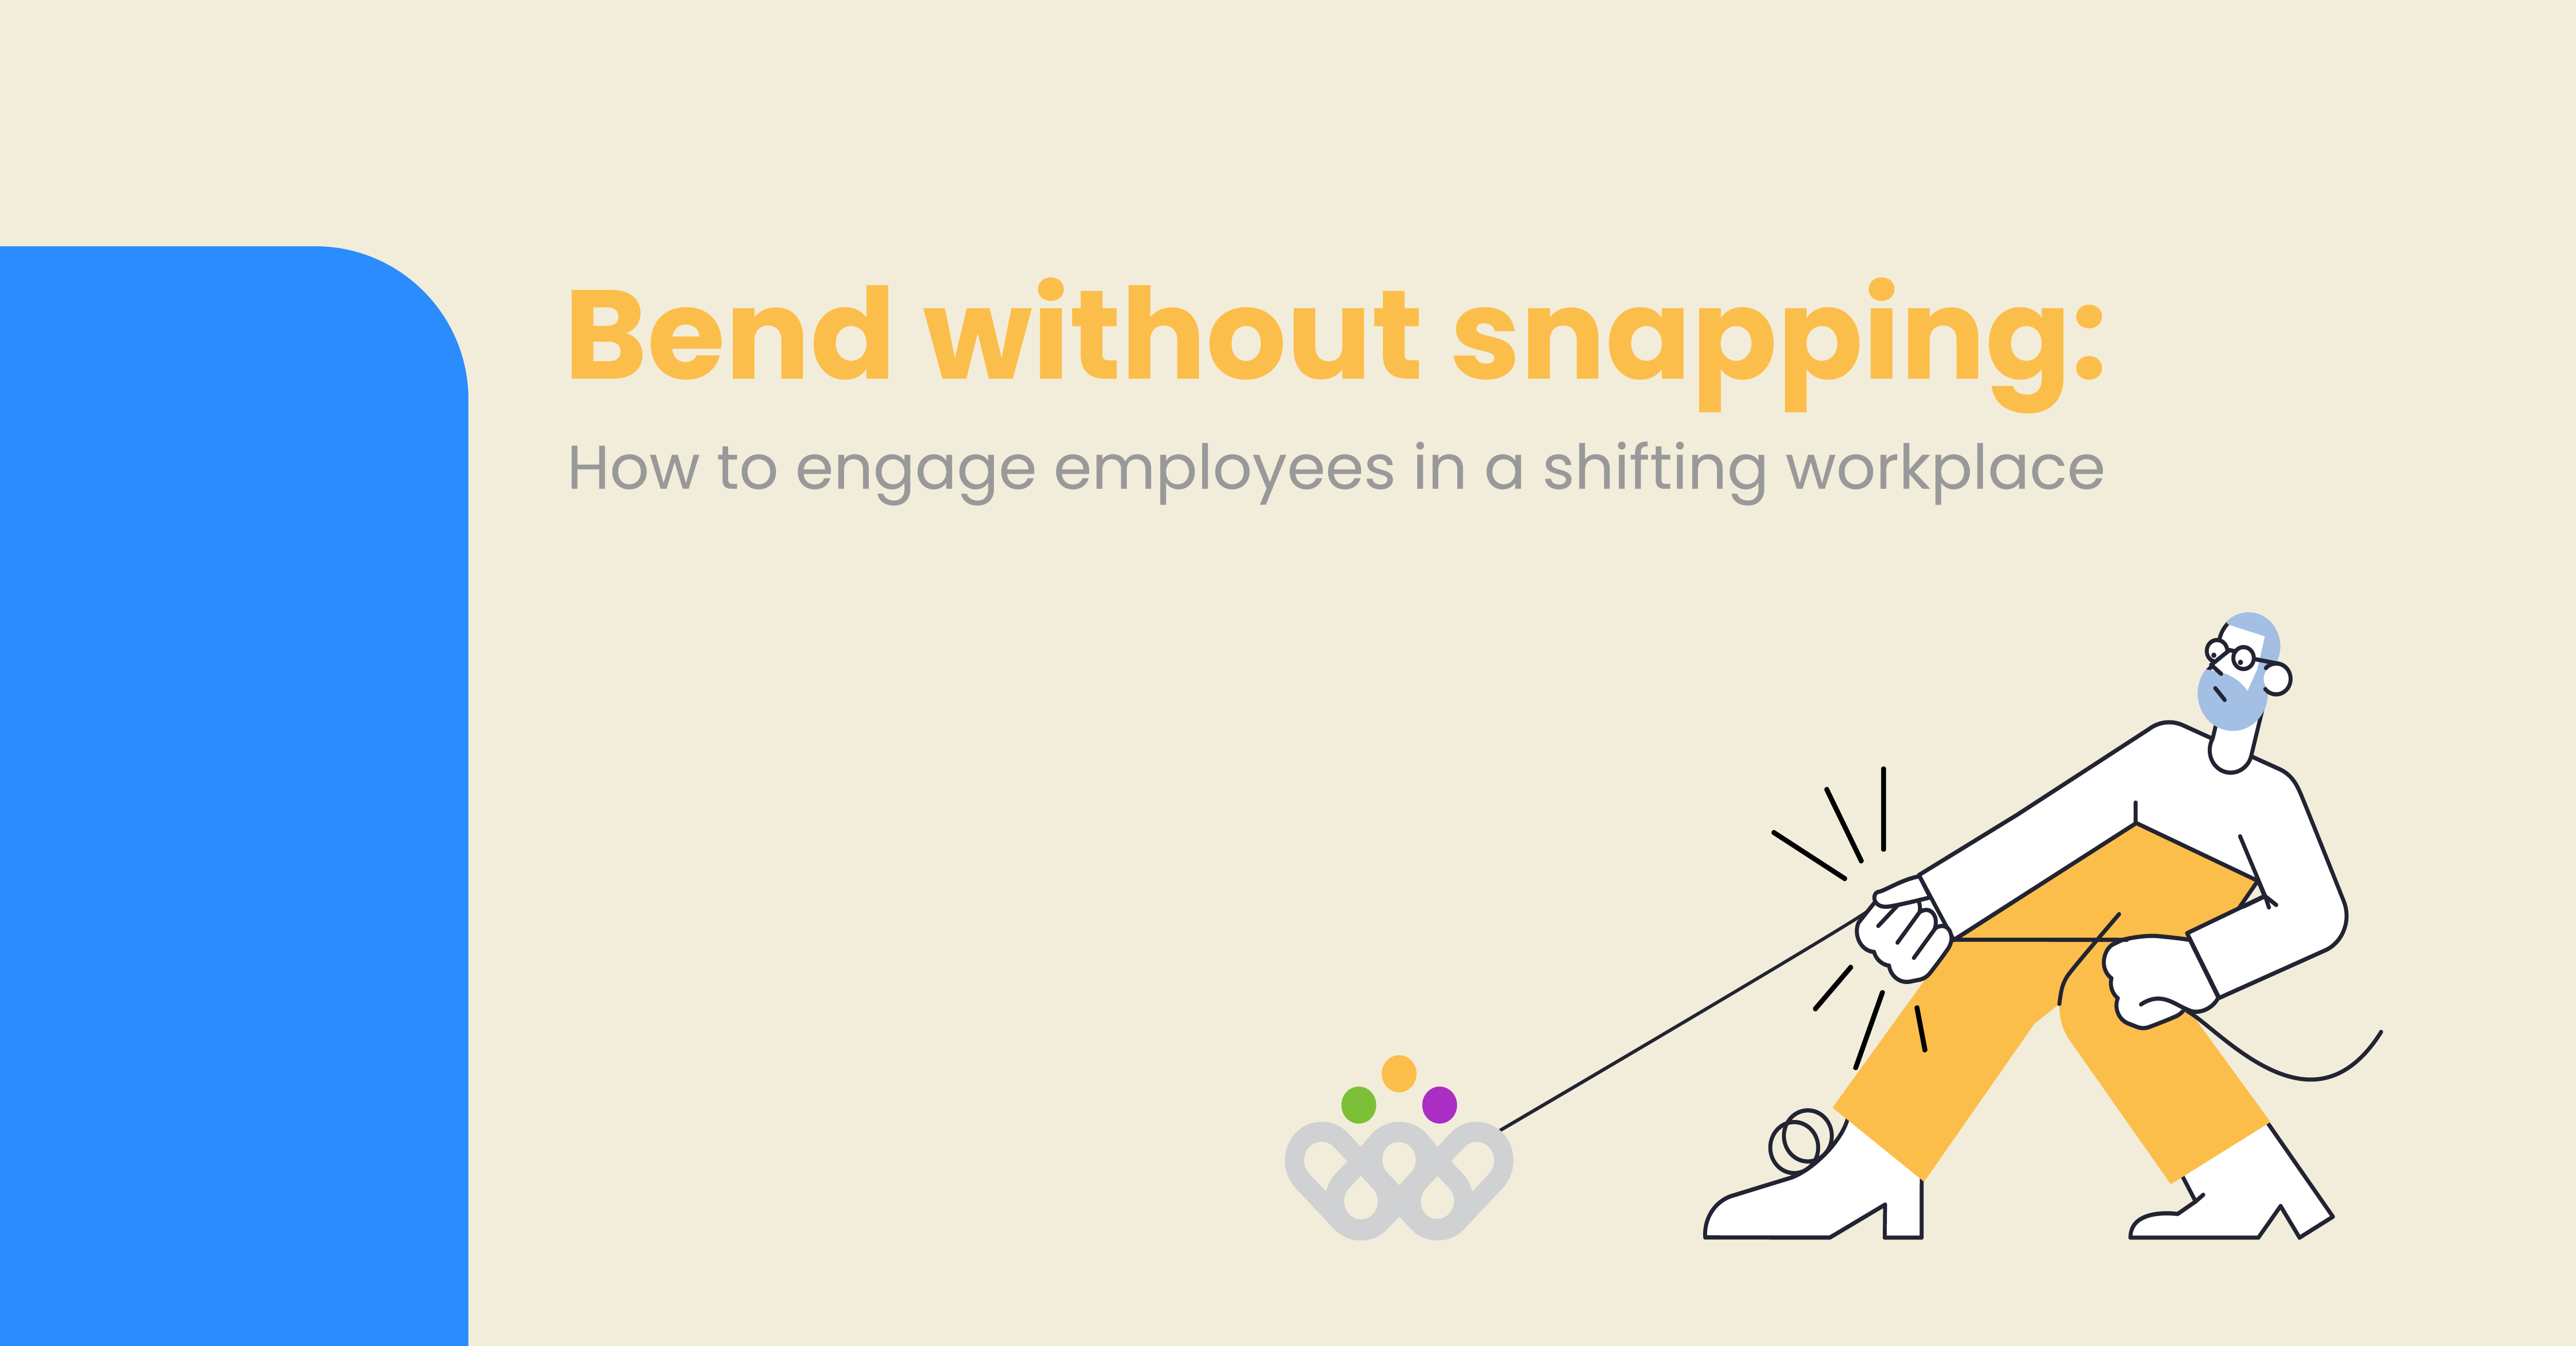 Bend without snapping: How to engage employees in a shifting workplace